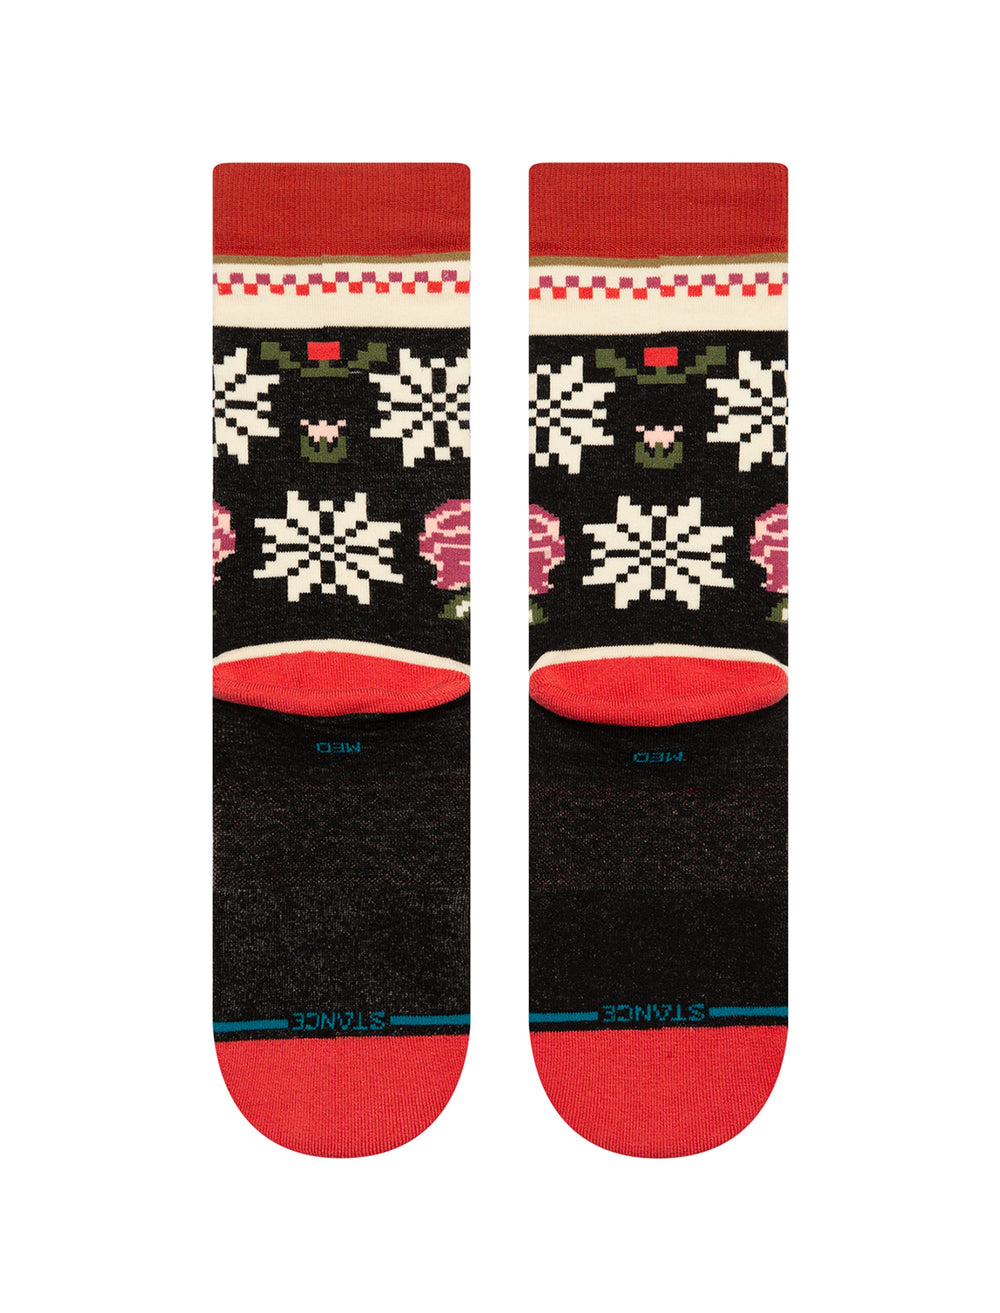 Back view of Stance's mistling toes crew socks.